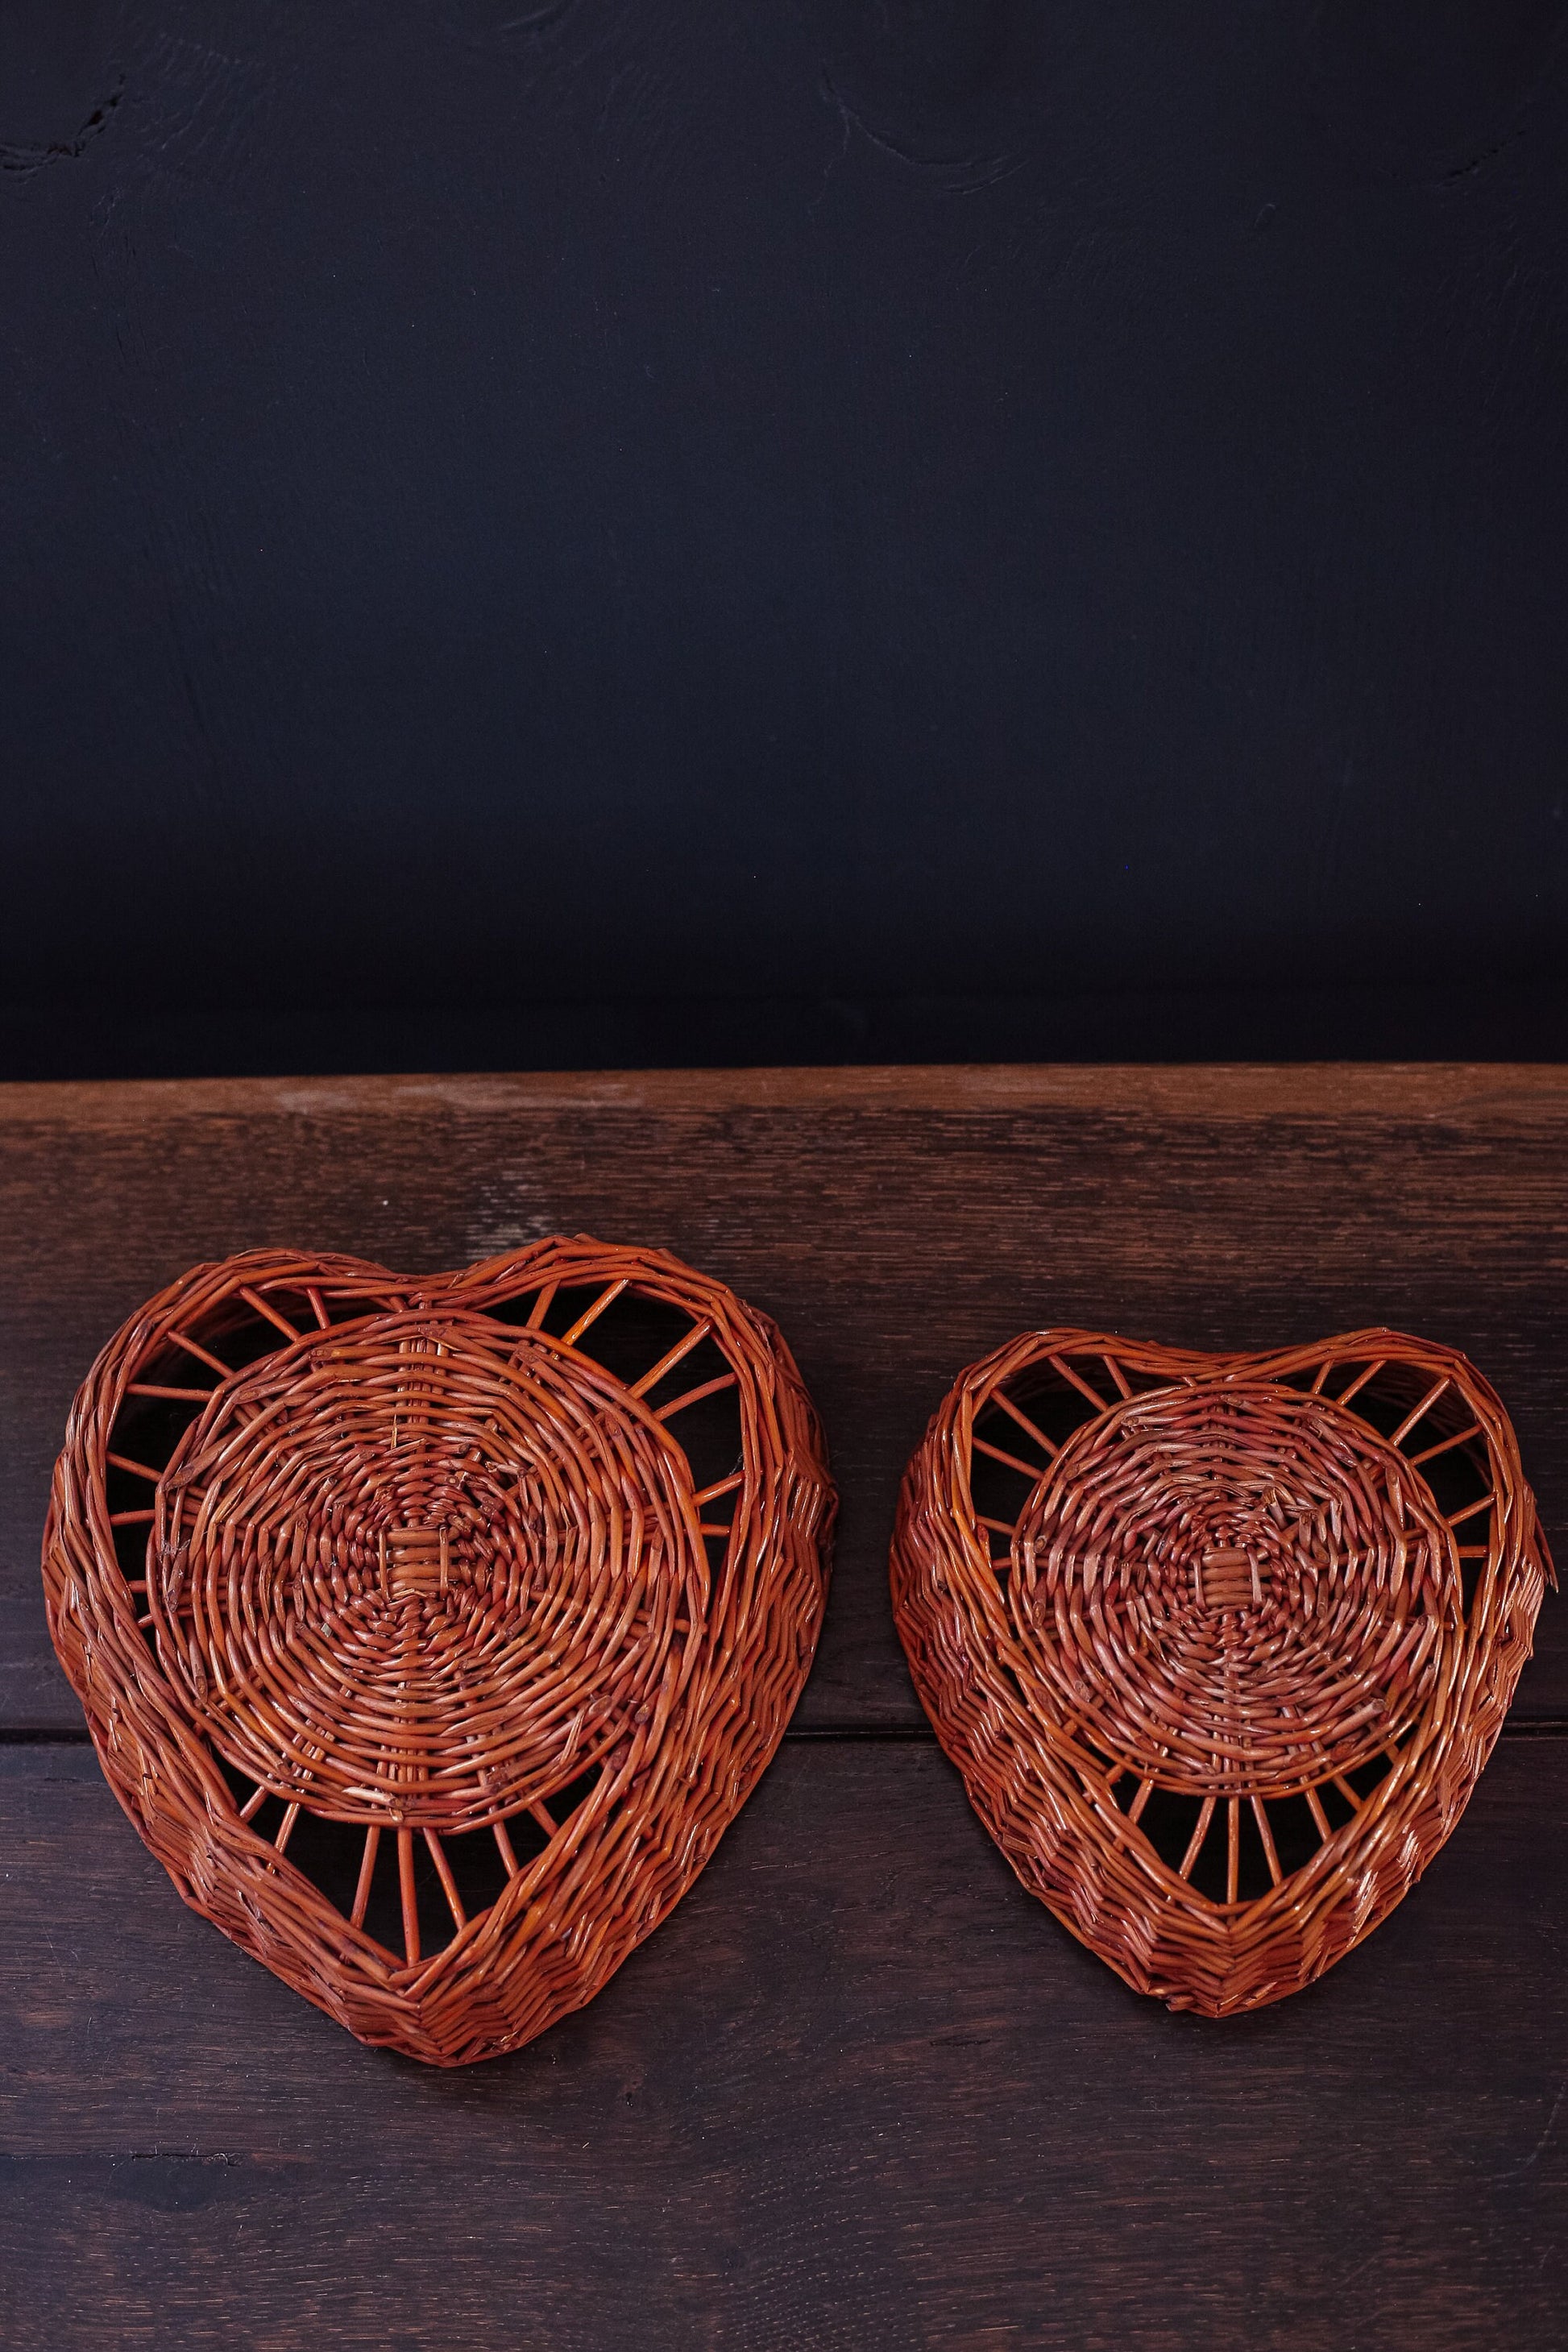 Pair of Nesting Heart Baskets - Vintage Wall Baskets